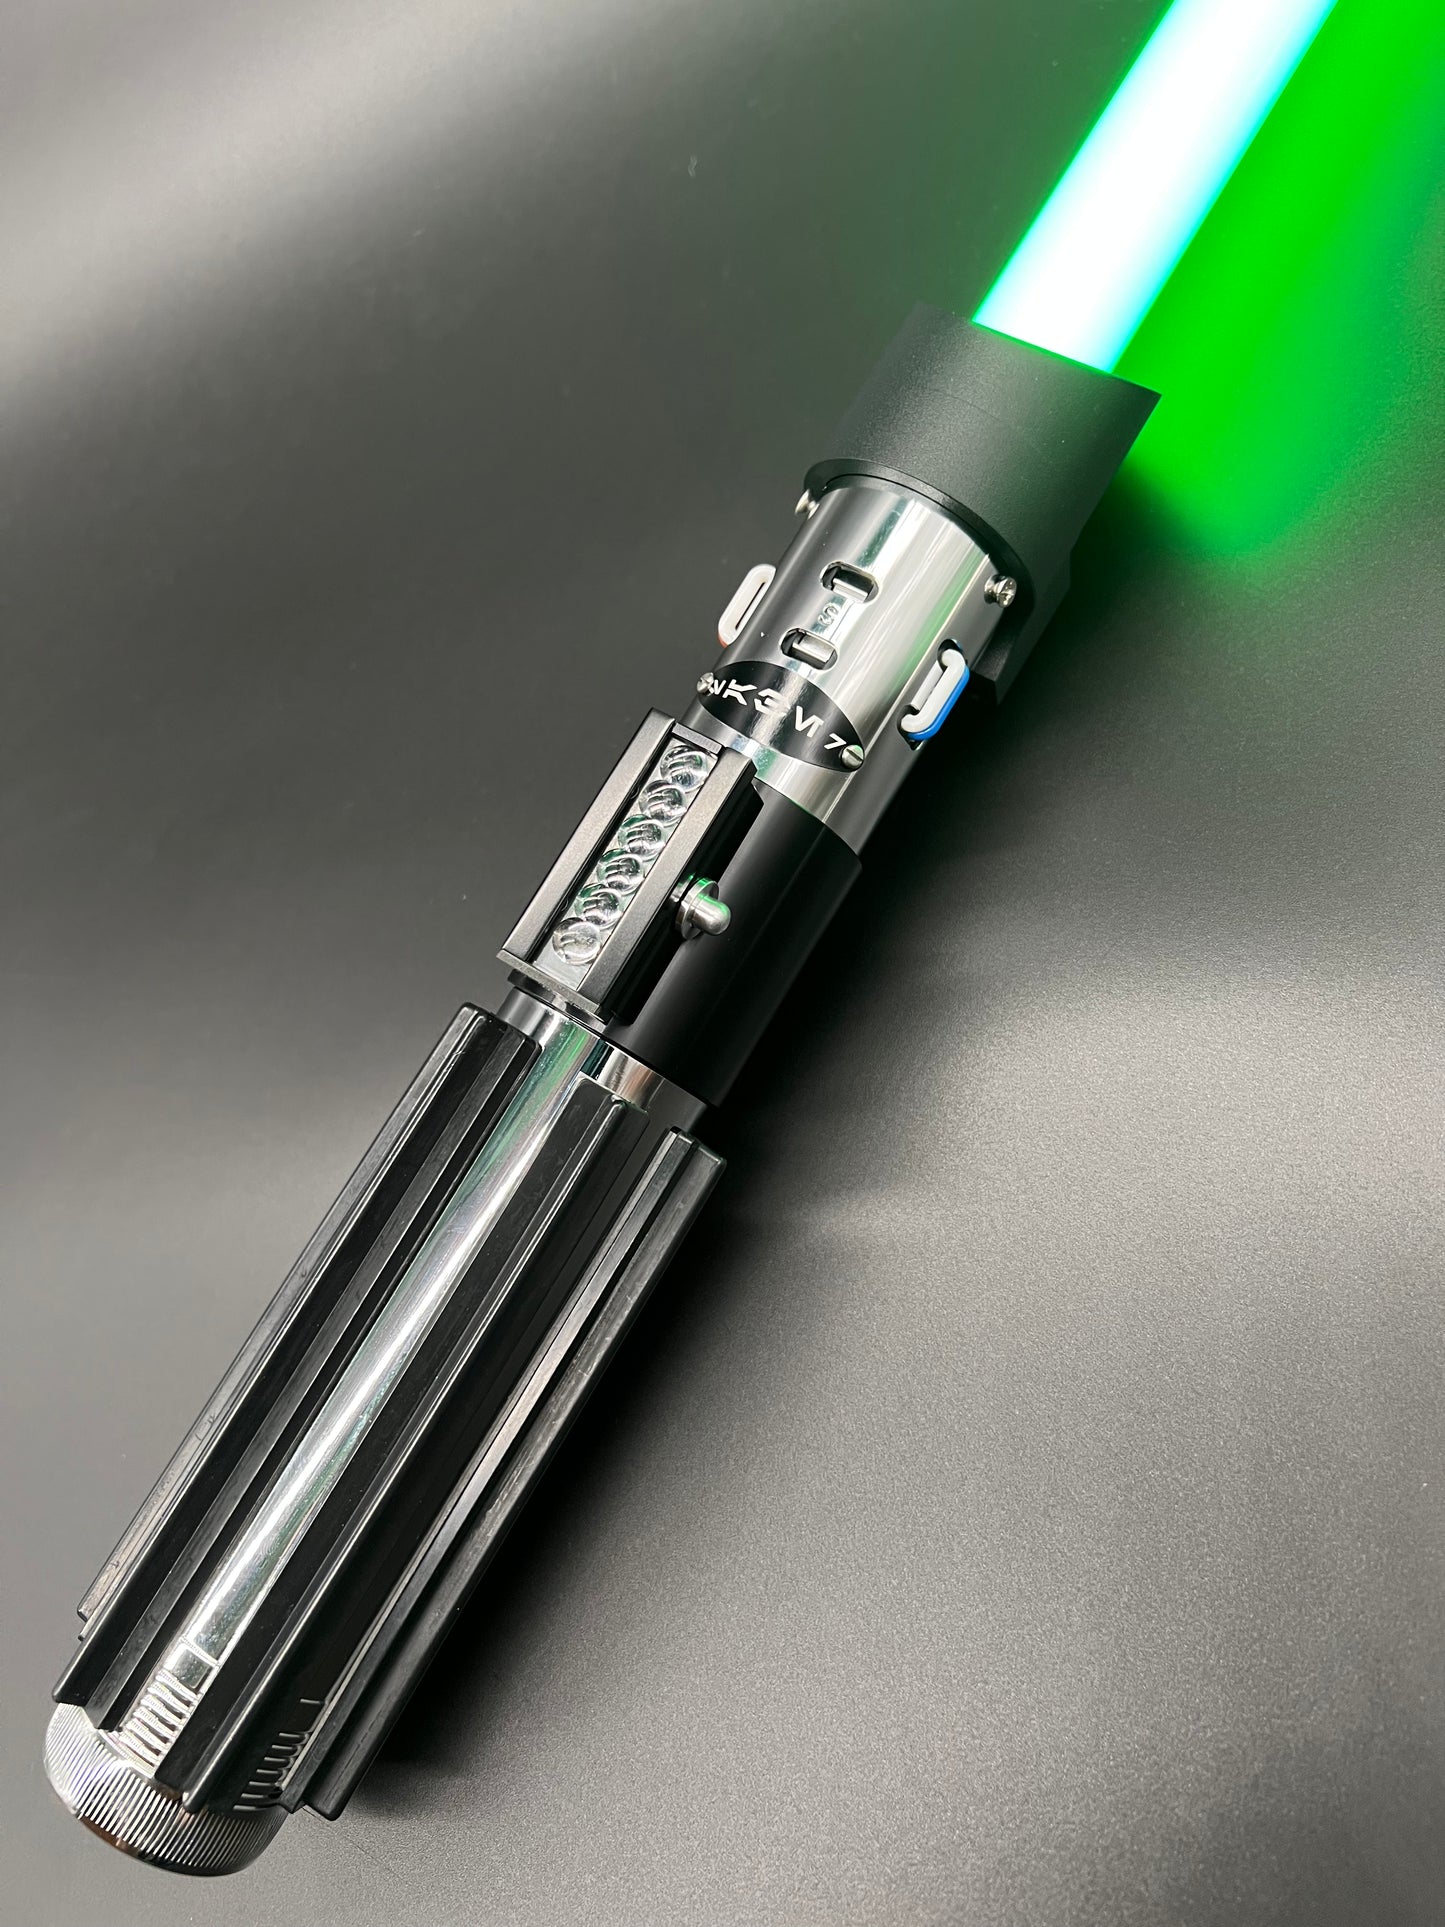 THE LORD VADER LIGHTSABER